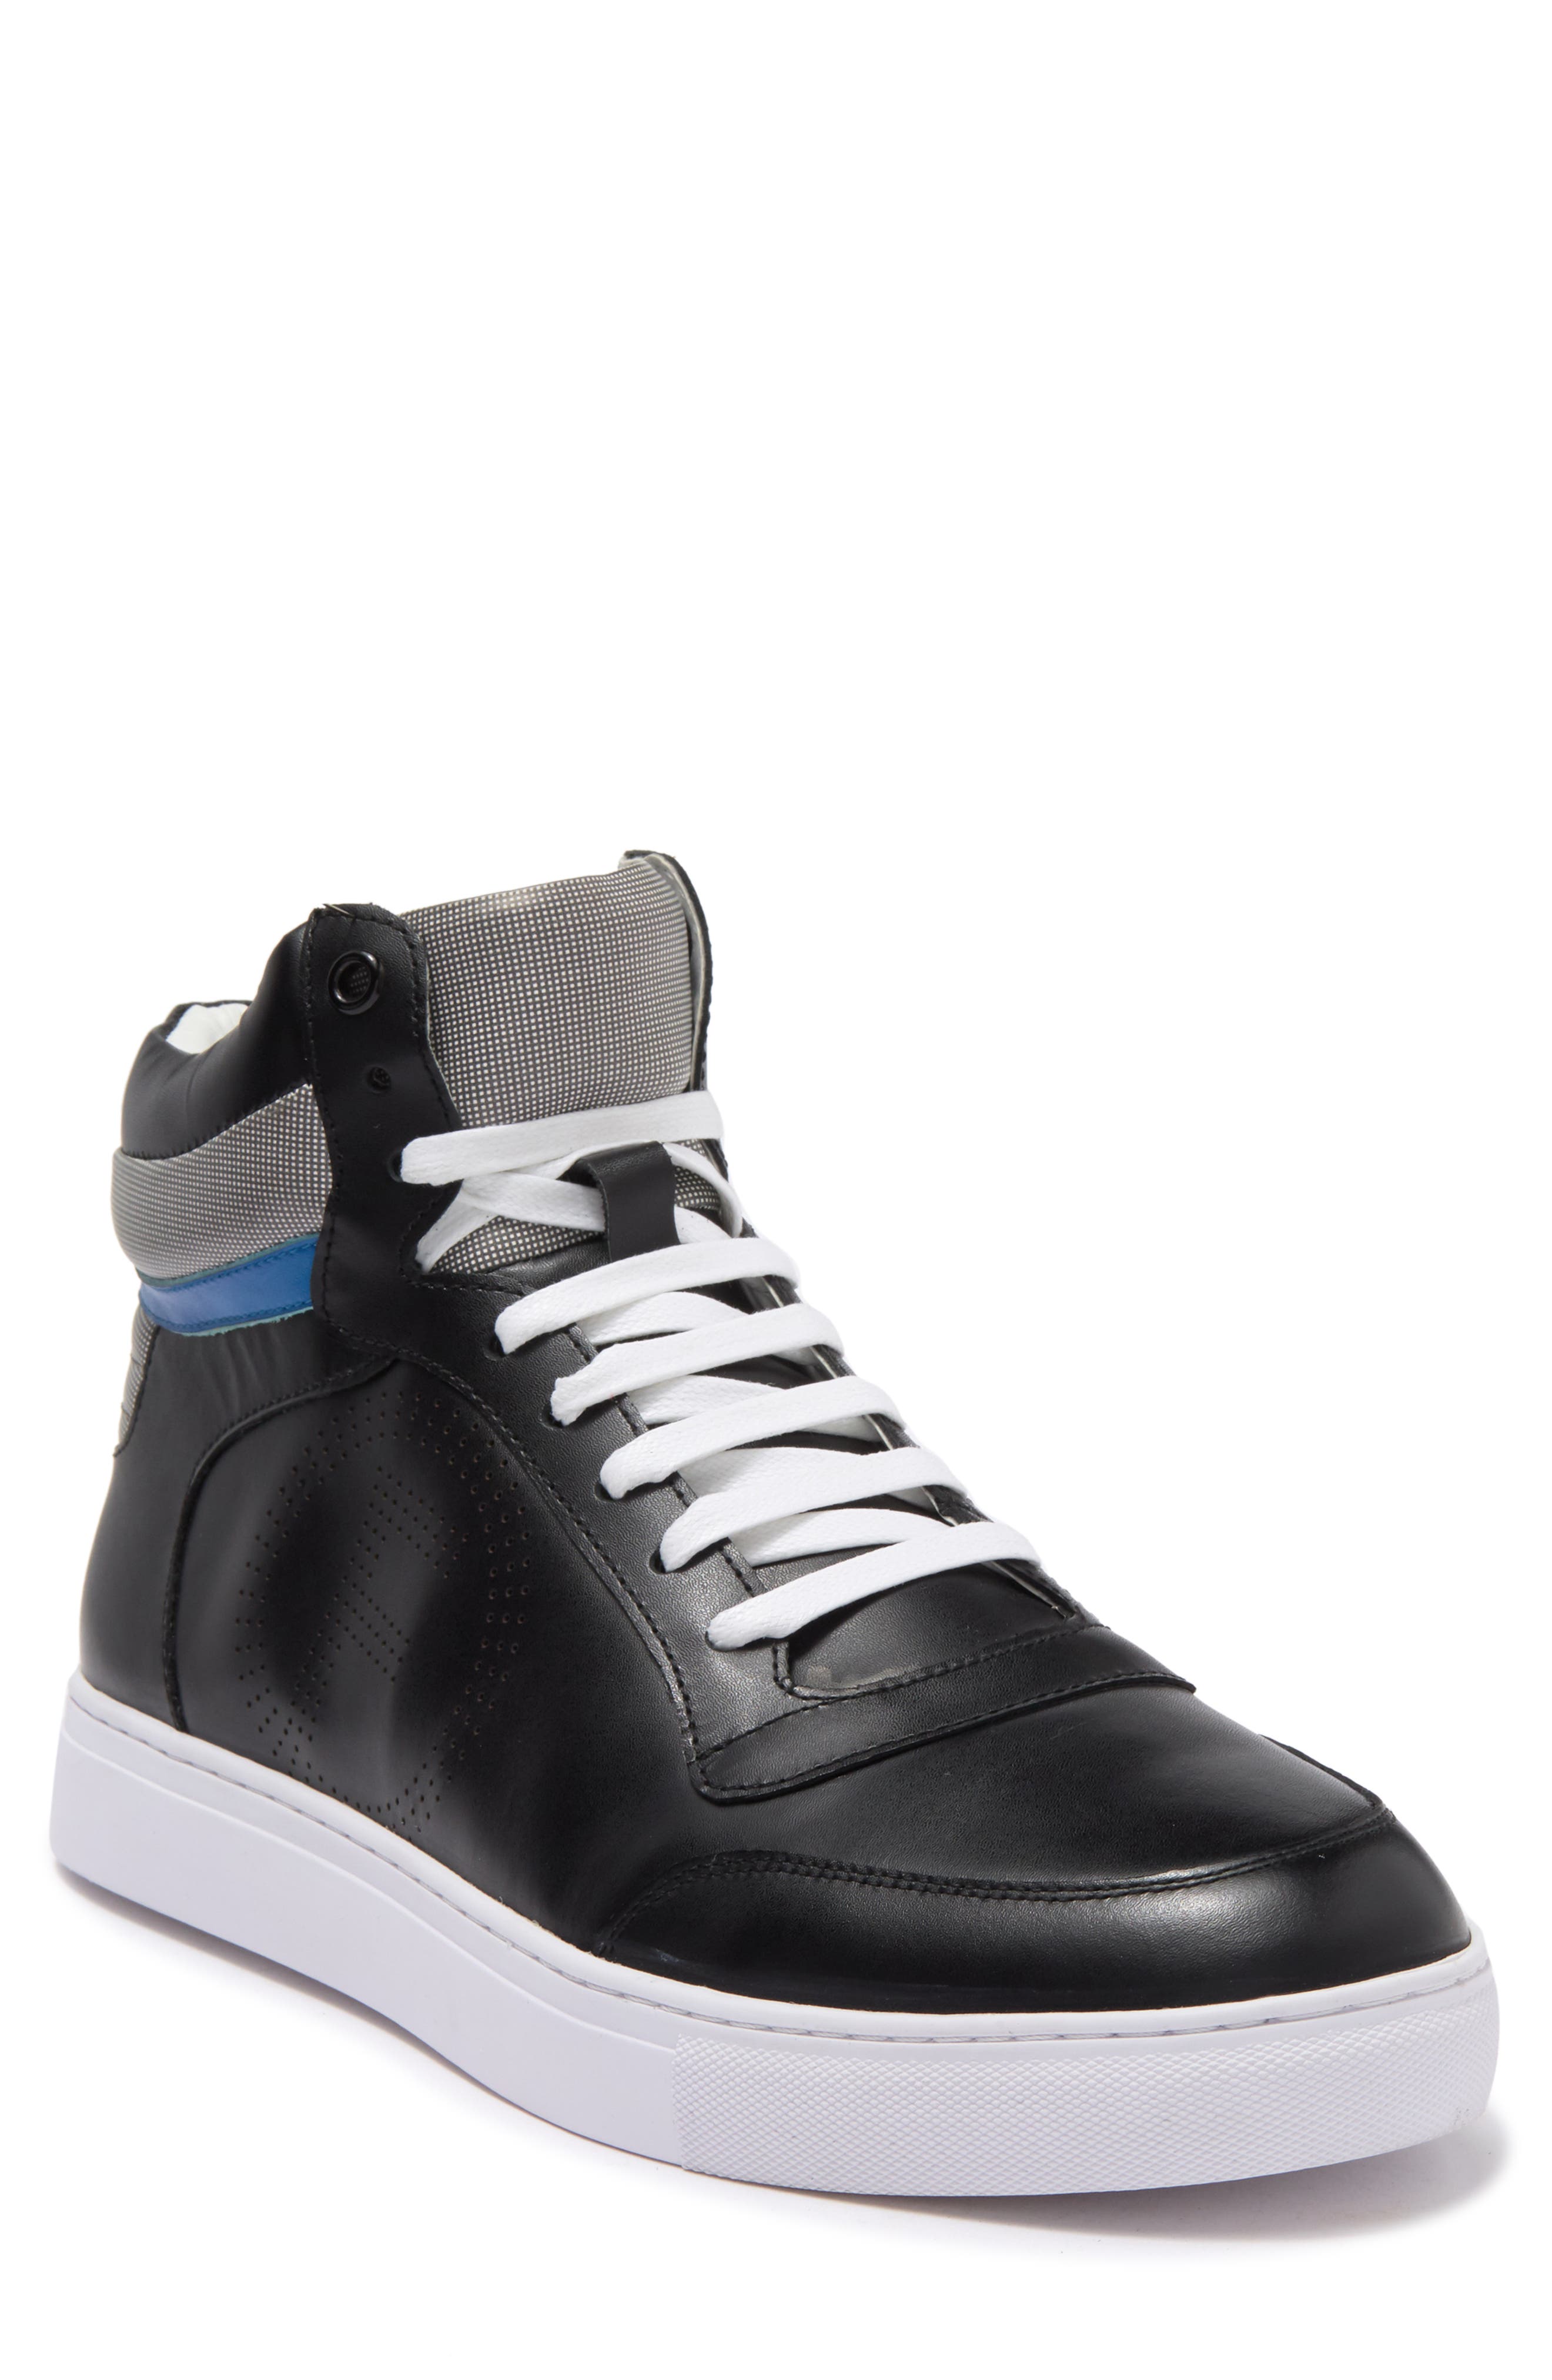 French Connection Max High Top Sneaker In Black | ModeSens